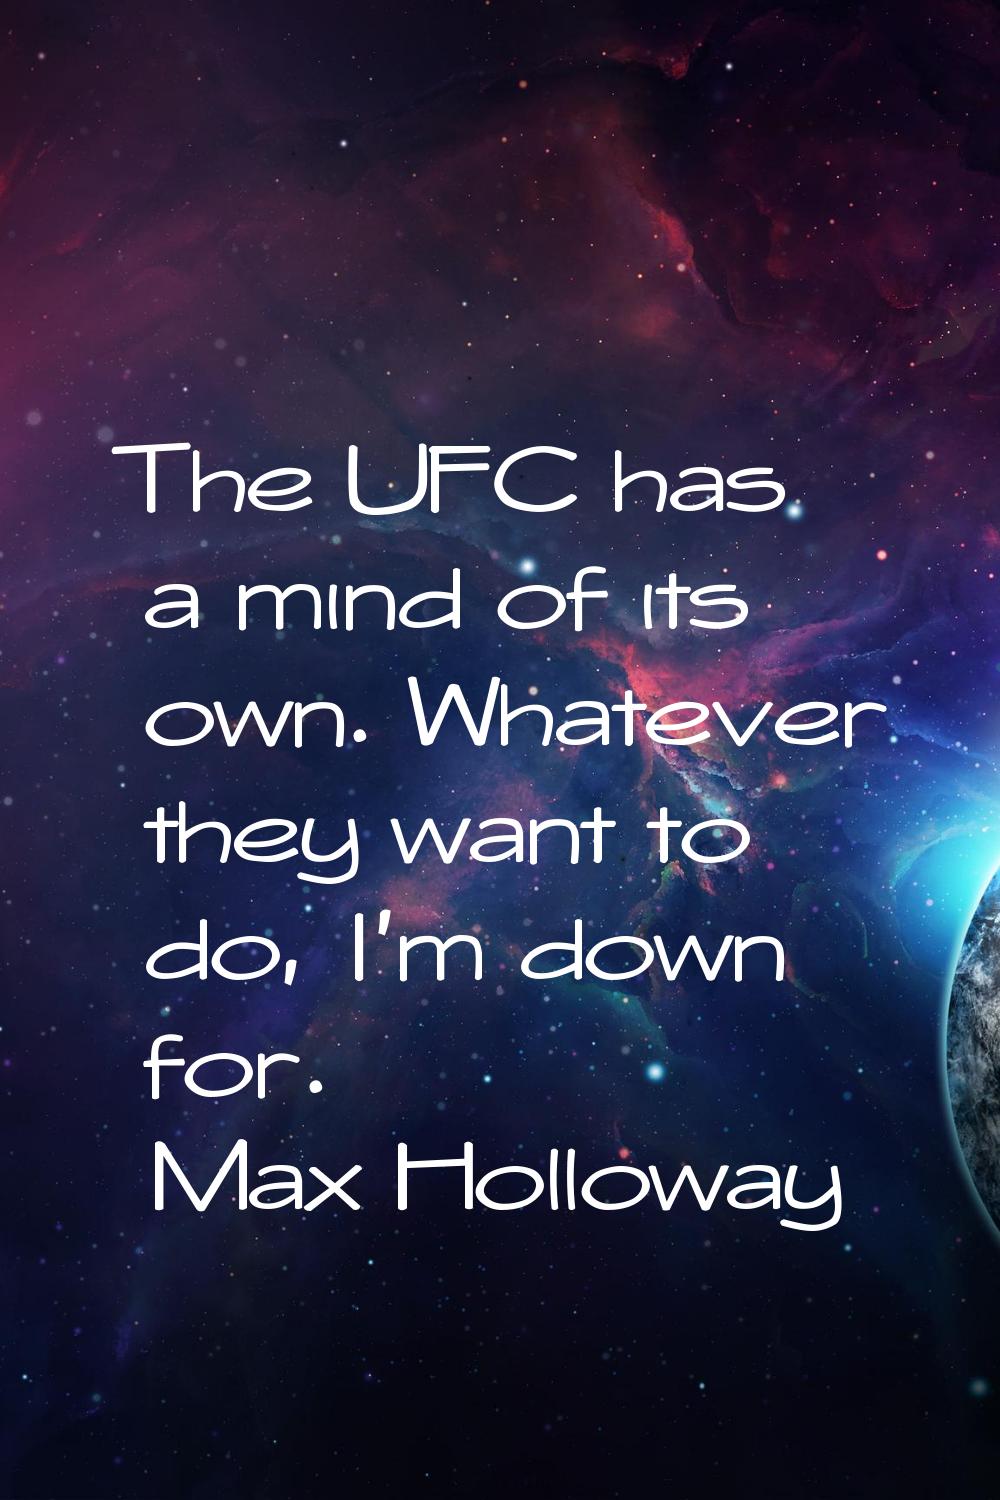 The UFC has a mind of its own. Whatever they want to do, I'm down for.